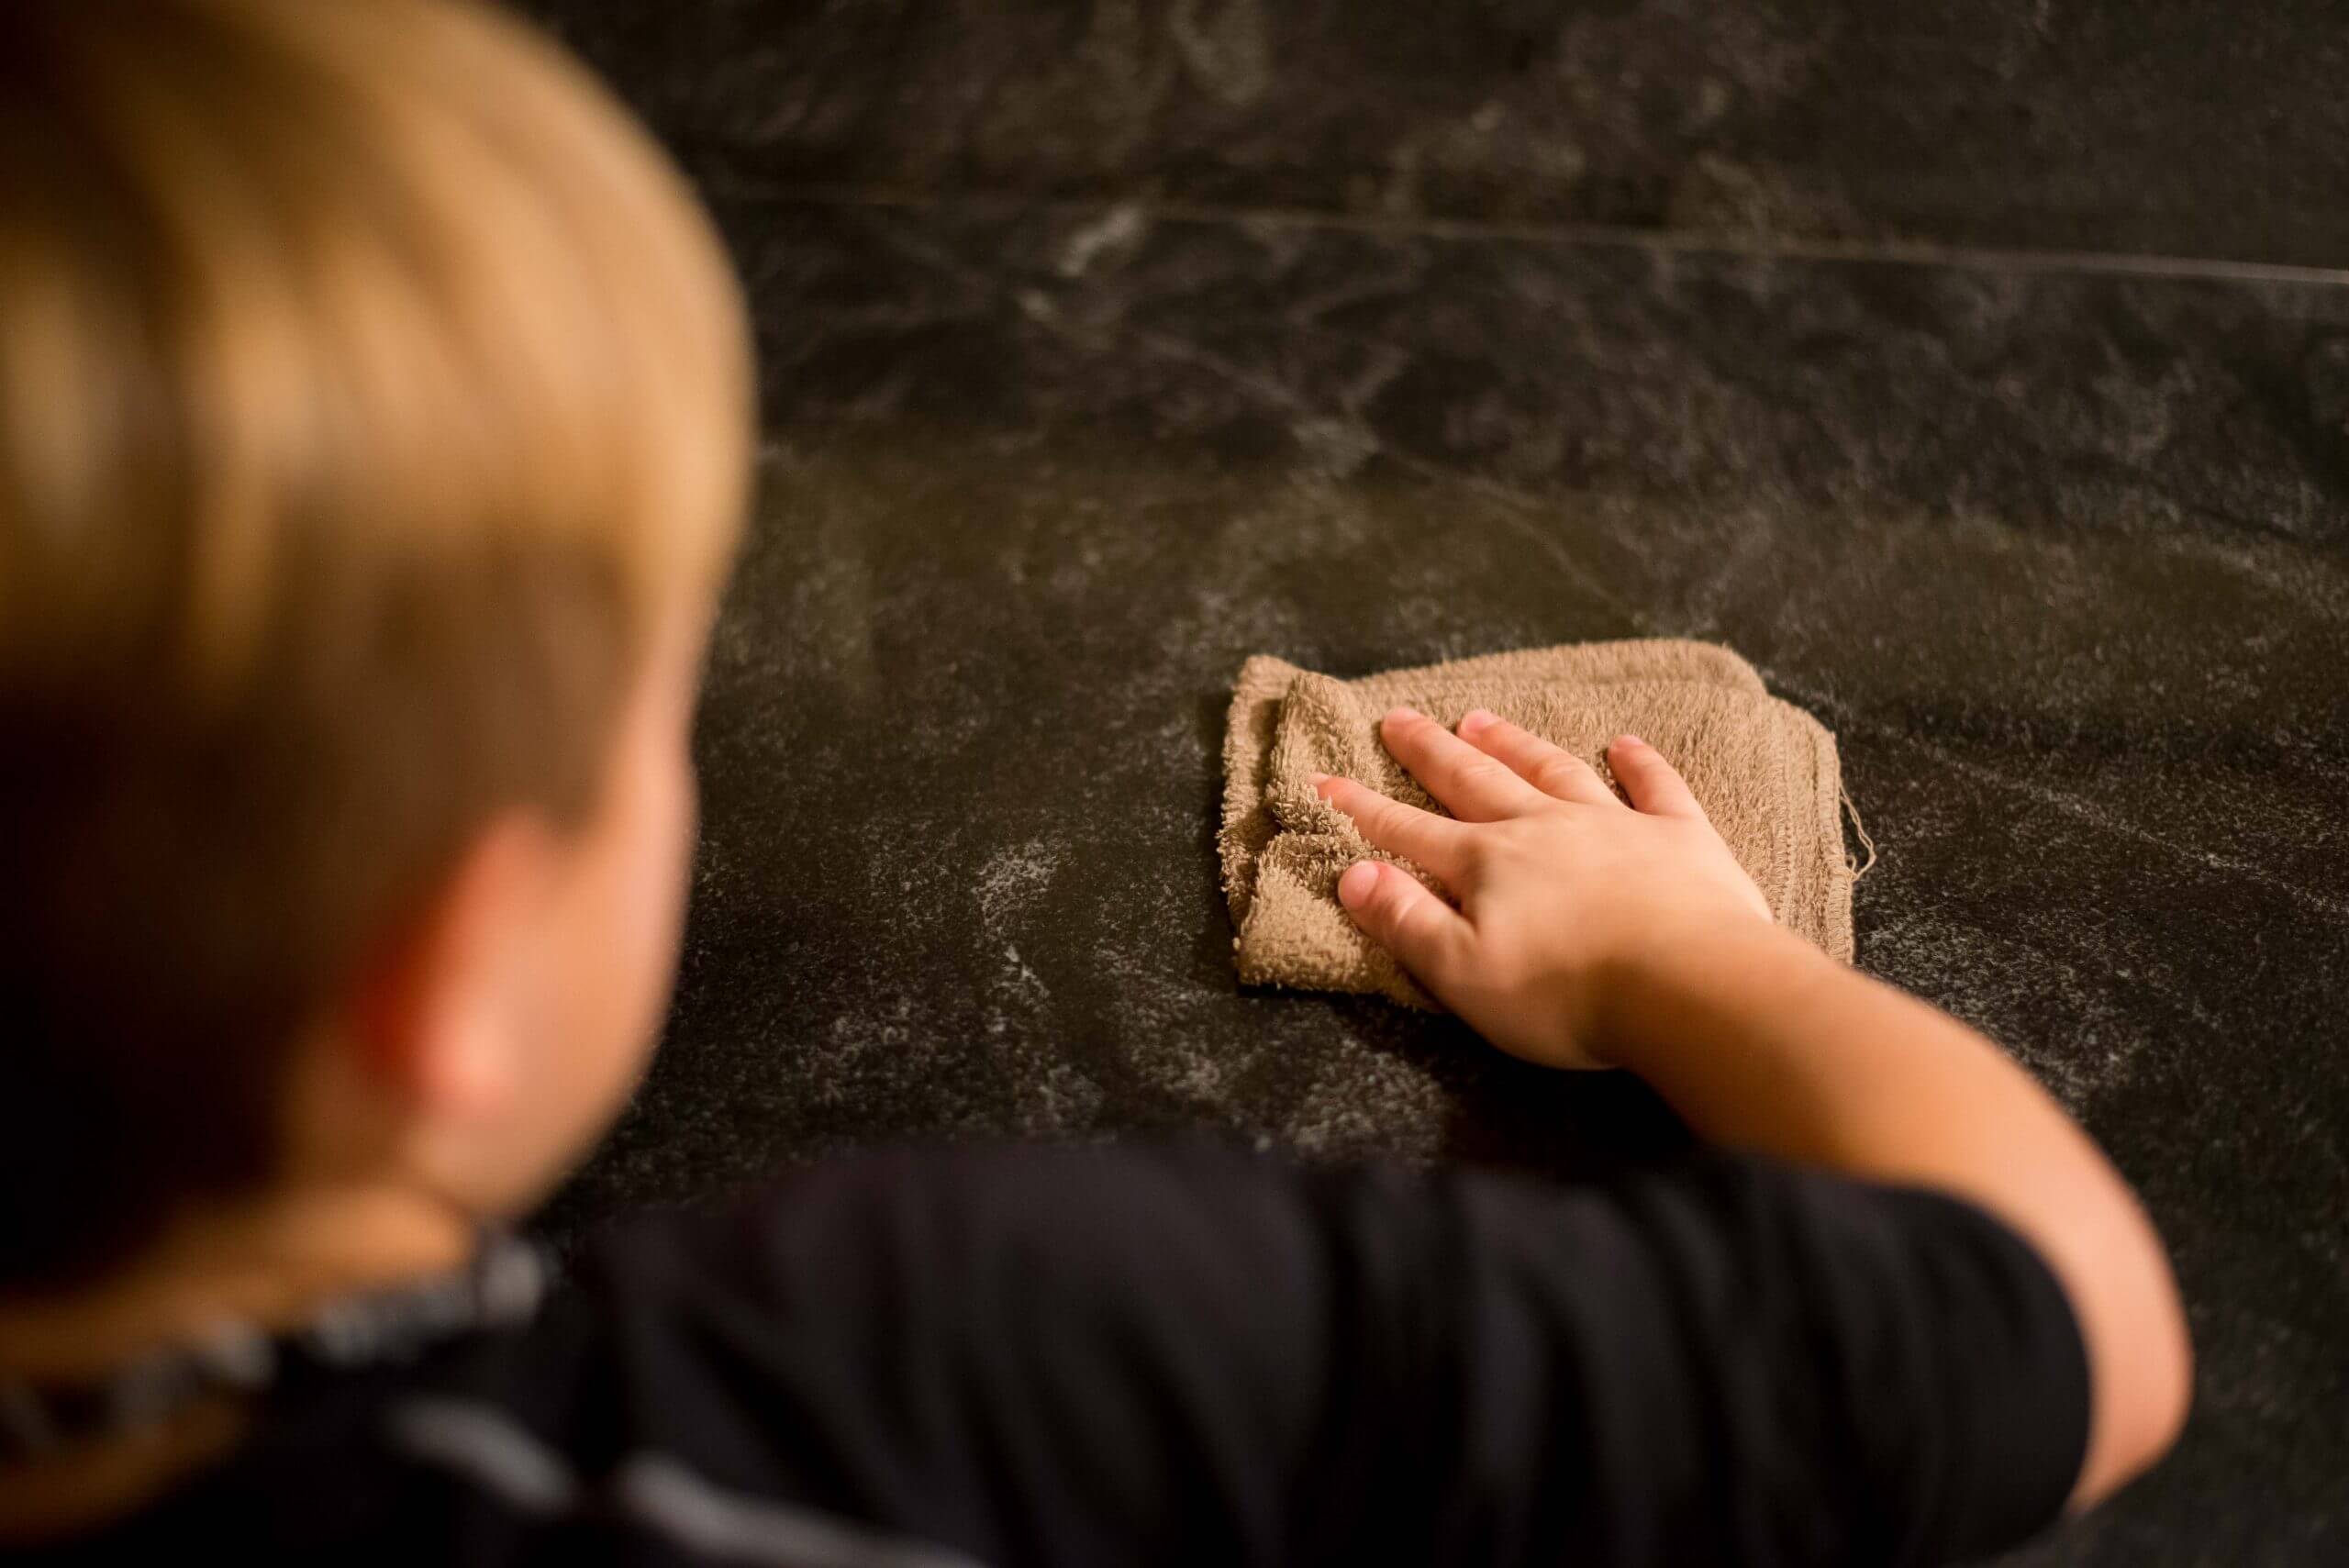 A child washes a hard surface with a rag.